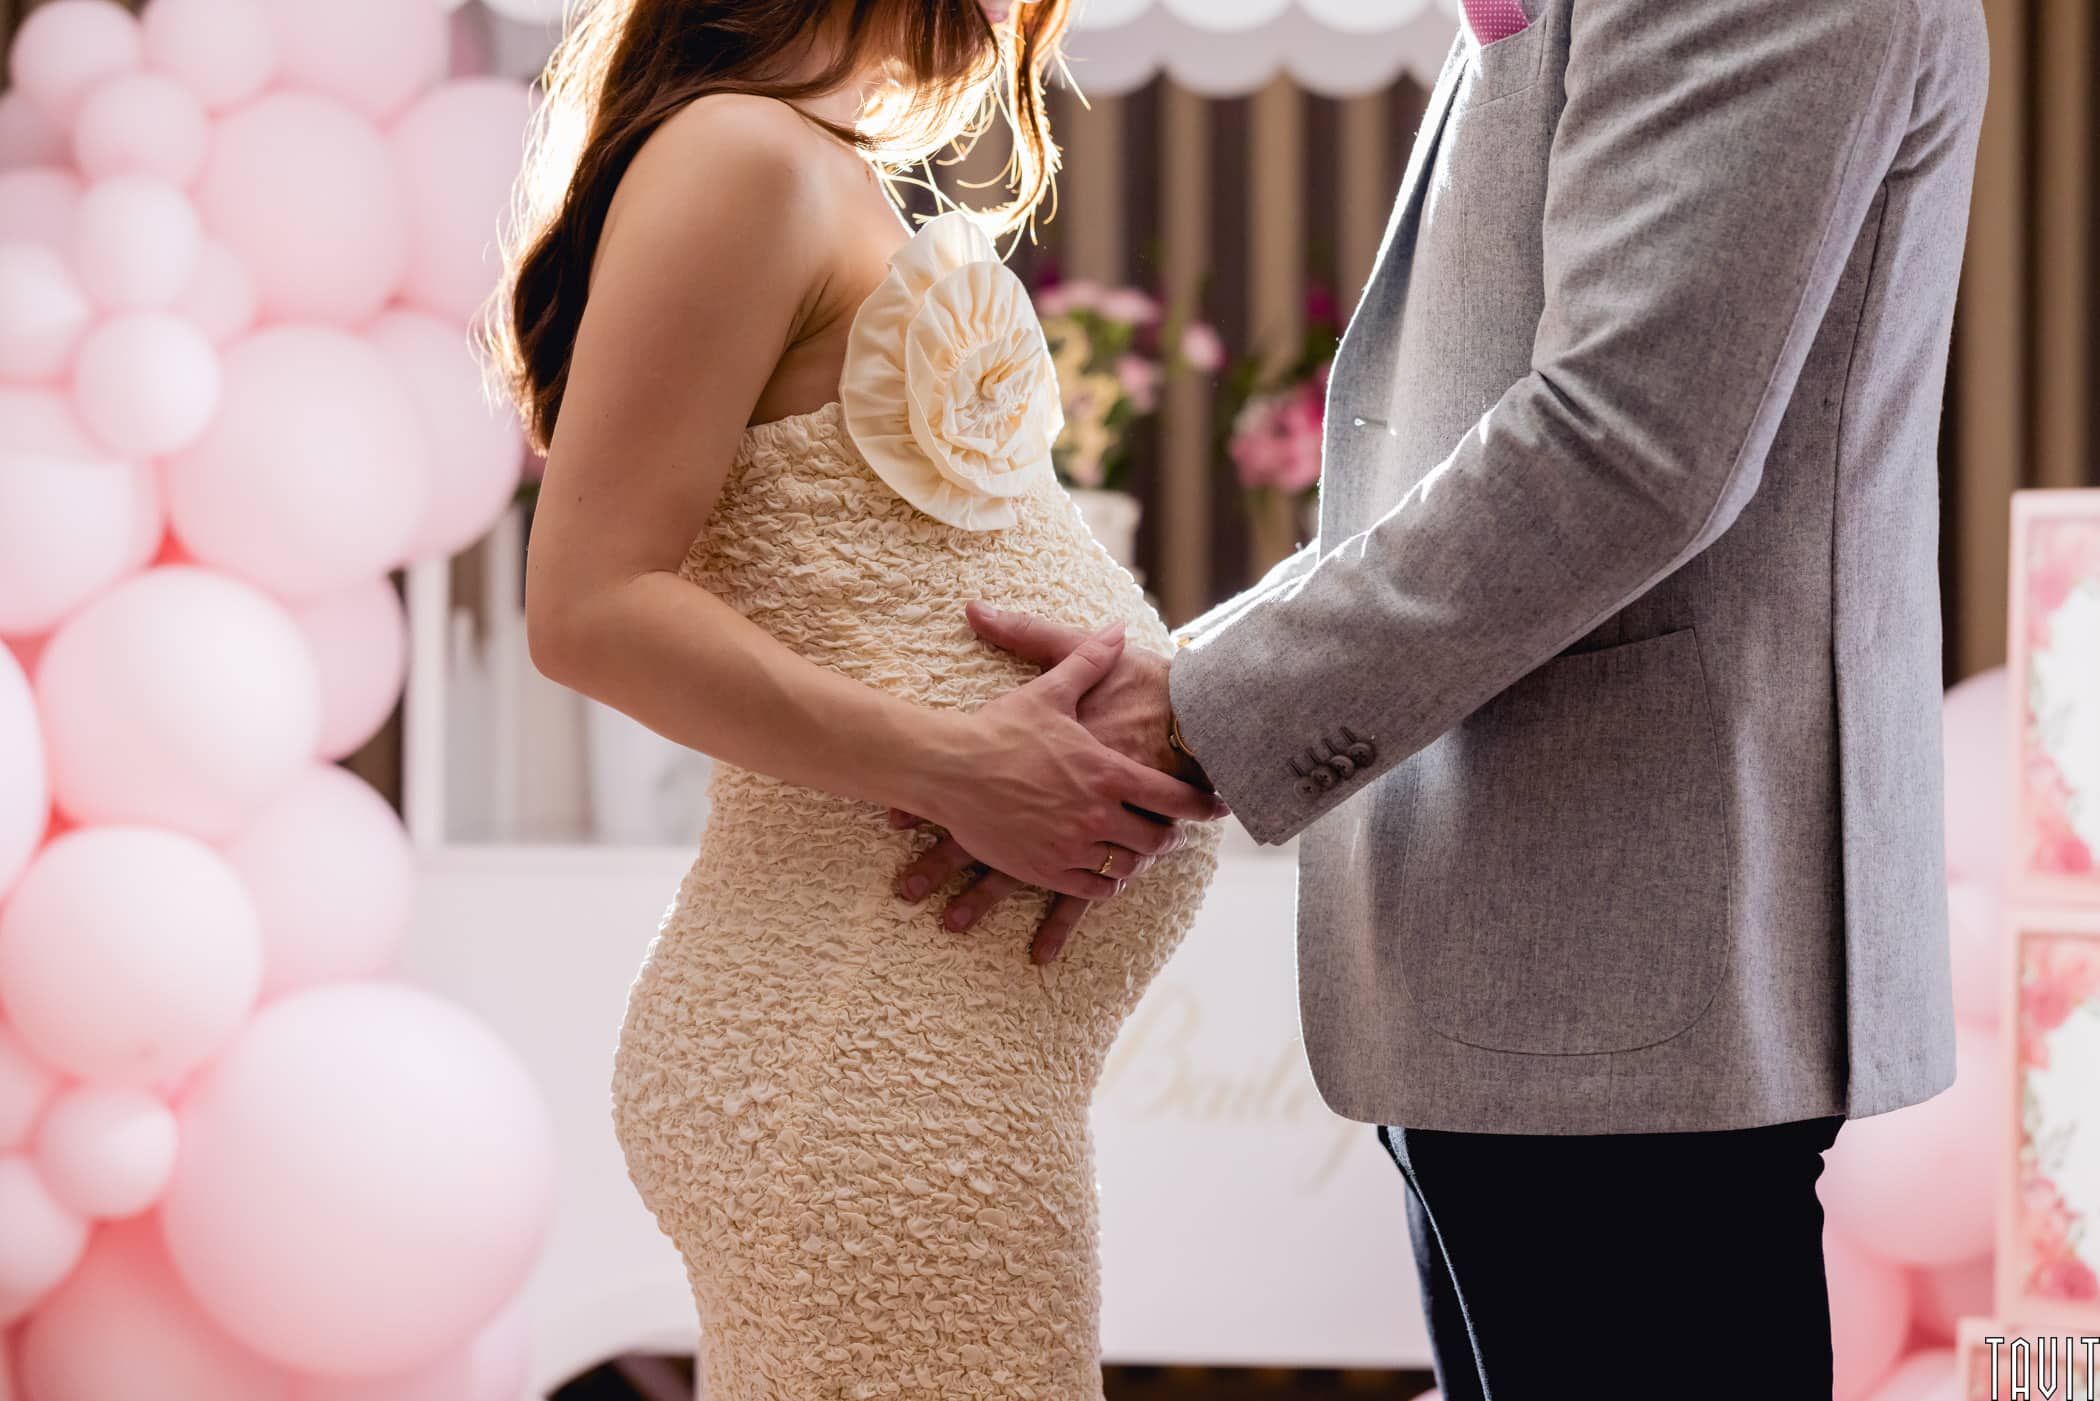 Man holding woman's pregnant tummy at baby shower